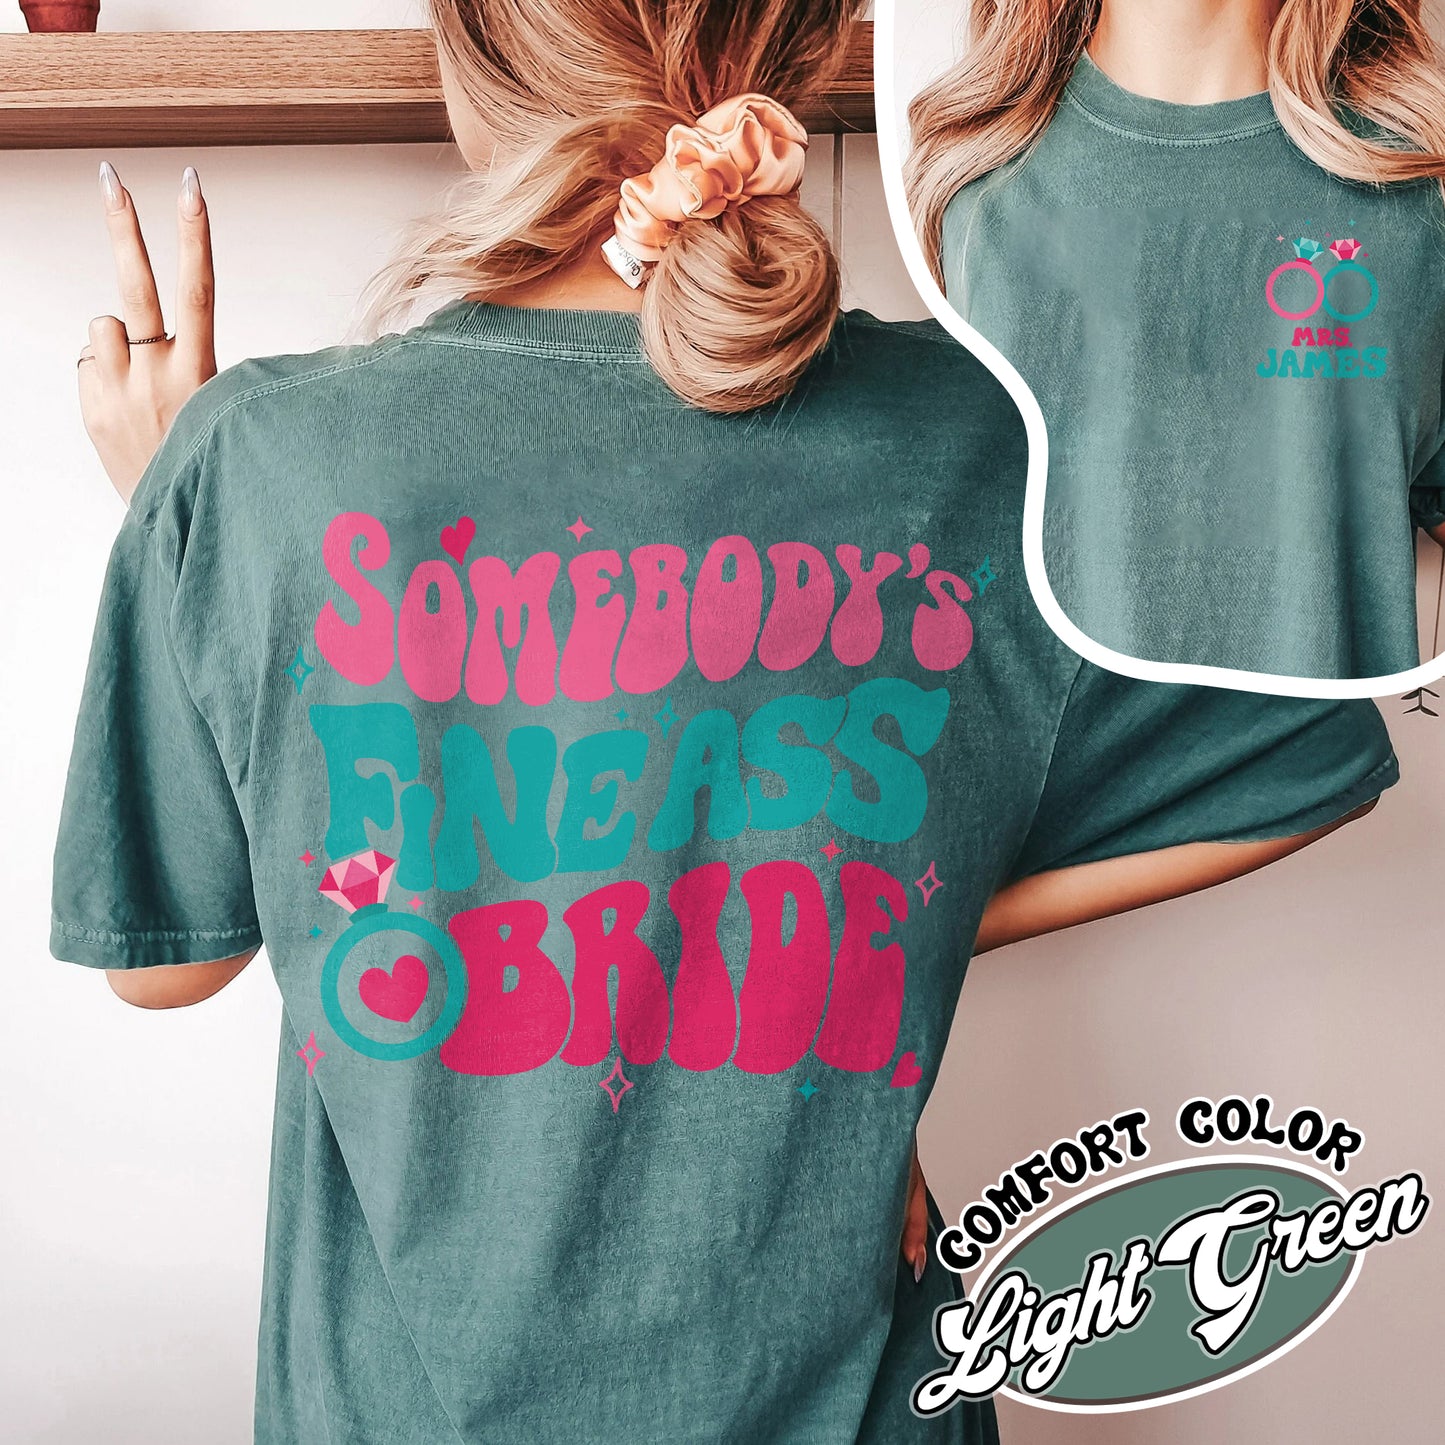 Somebody’s Fine Ass Bride Comfort Color Shirt, Bride Era, Custom Bride, Oversized Shirt Bride, Bride To Be Shirt